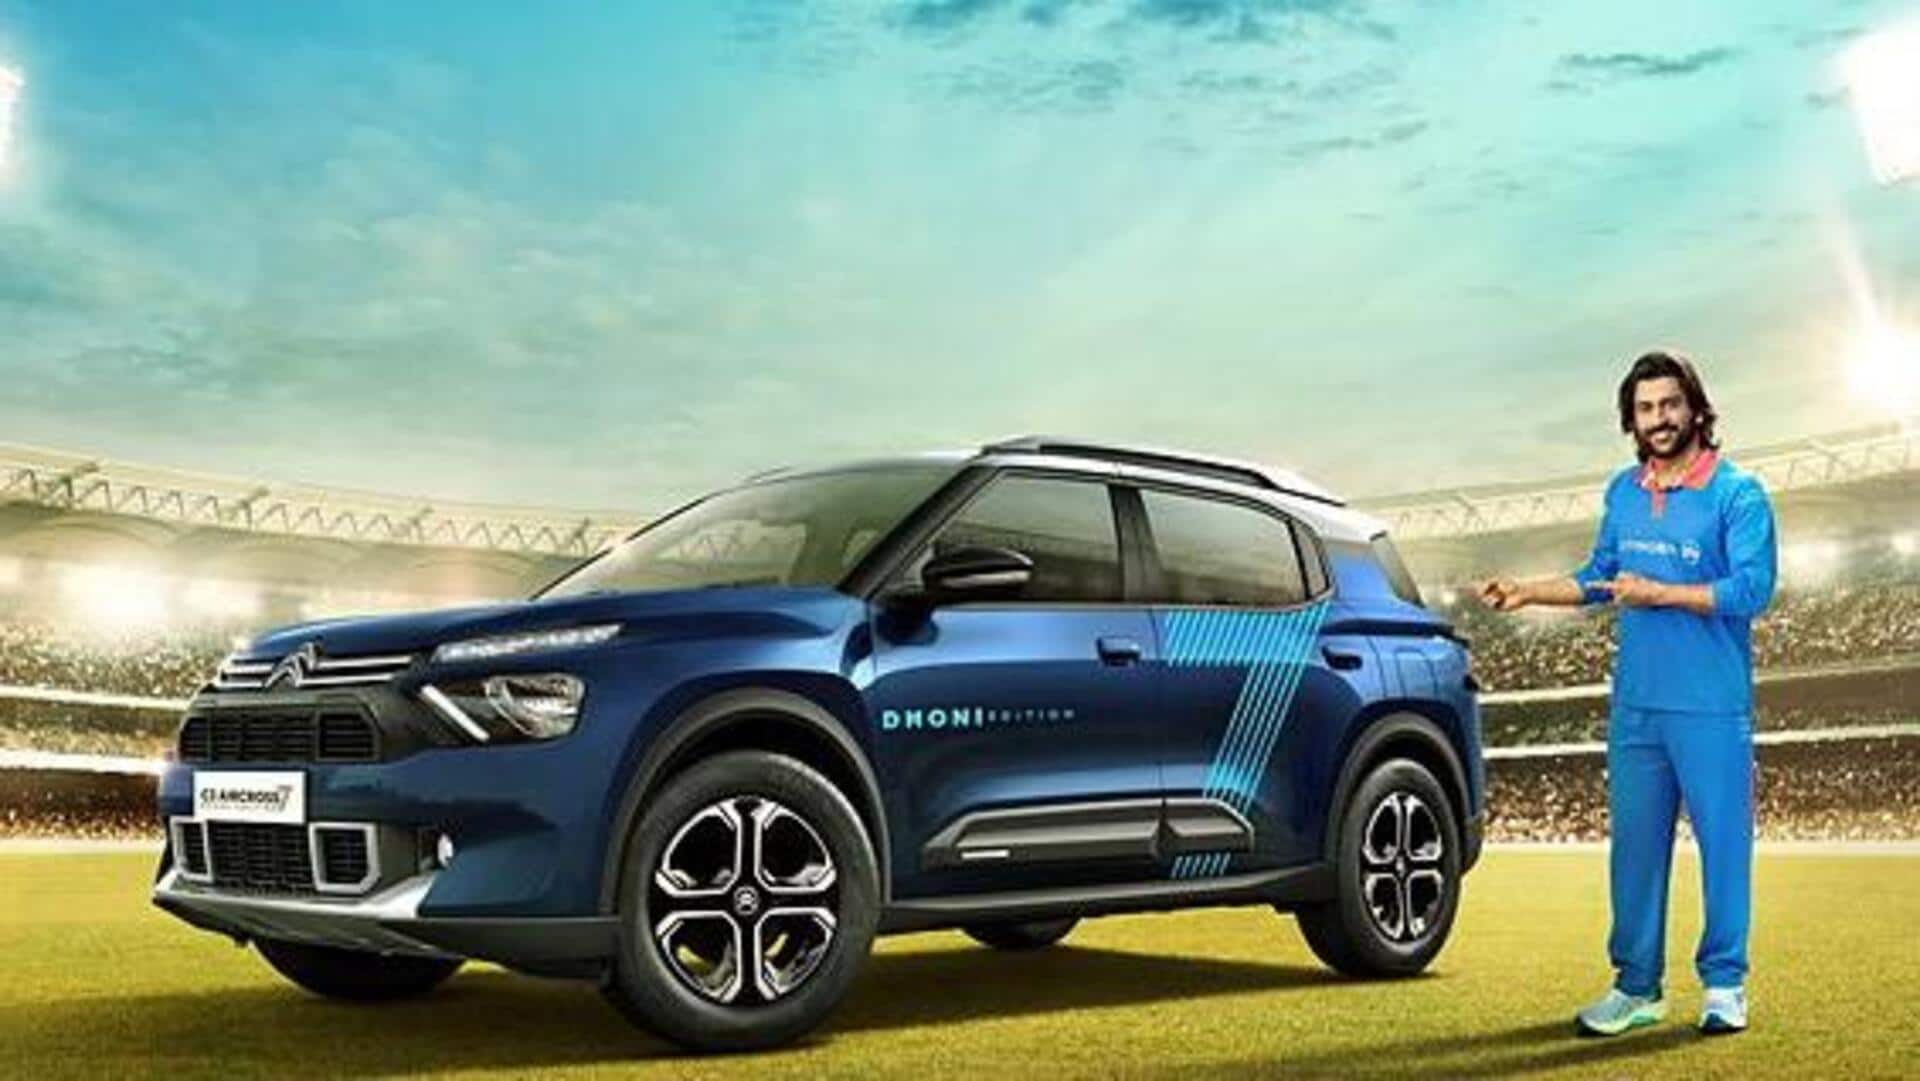 Citroen C3 Aircross 'Dhoni Edition' launched at ₹11.8 lakh